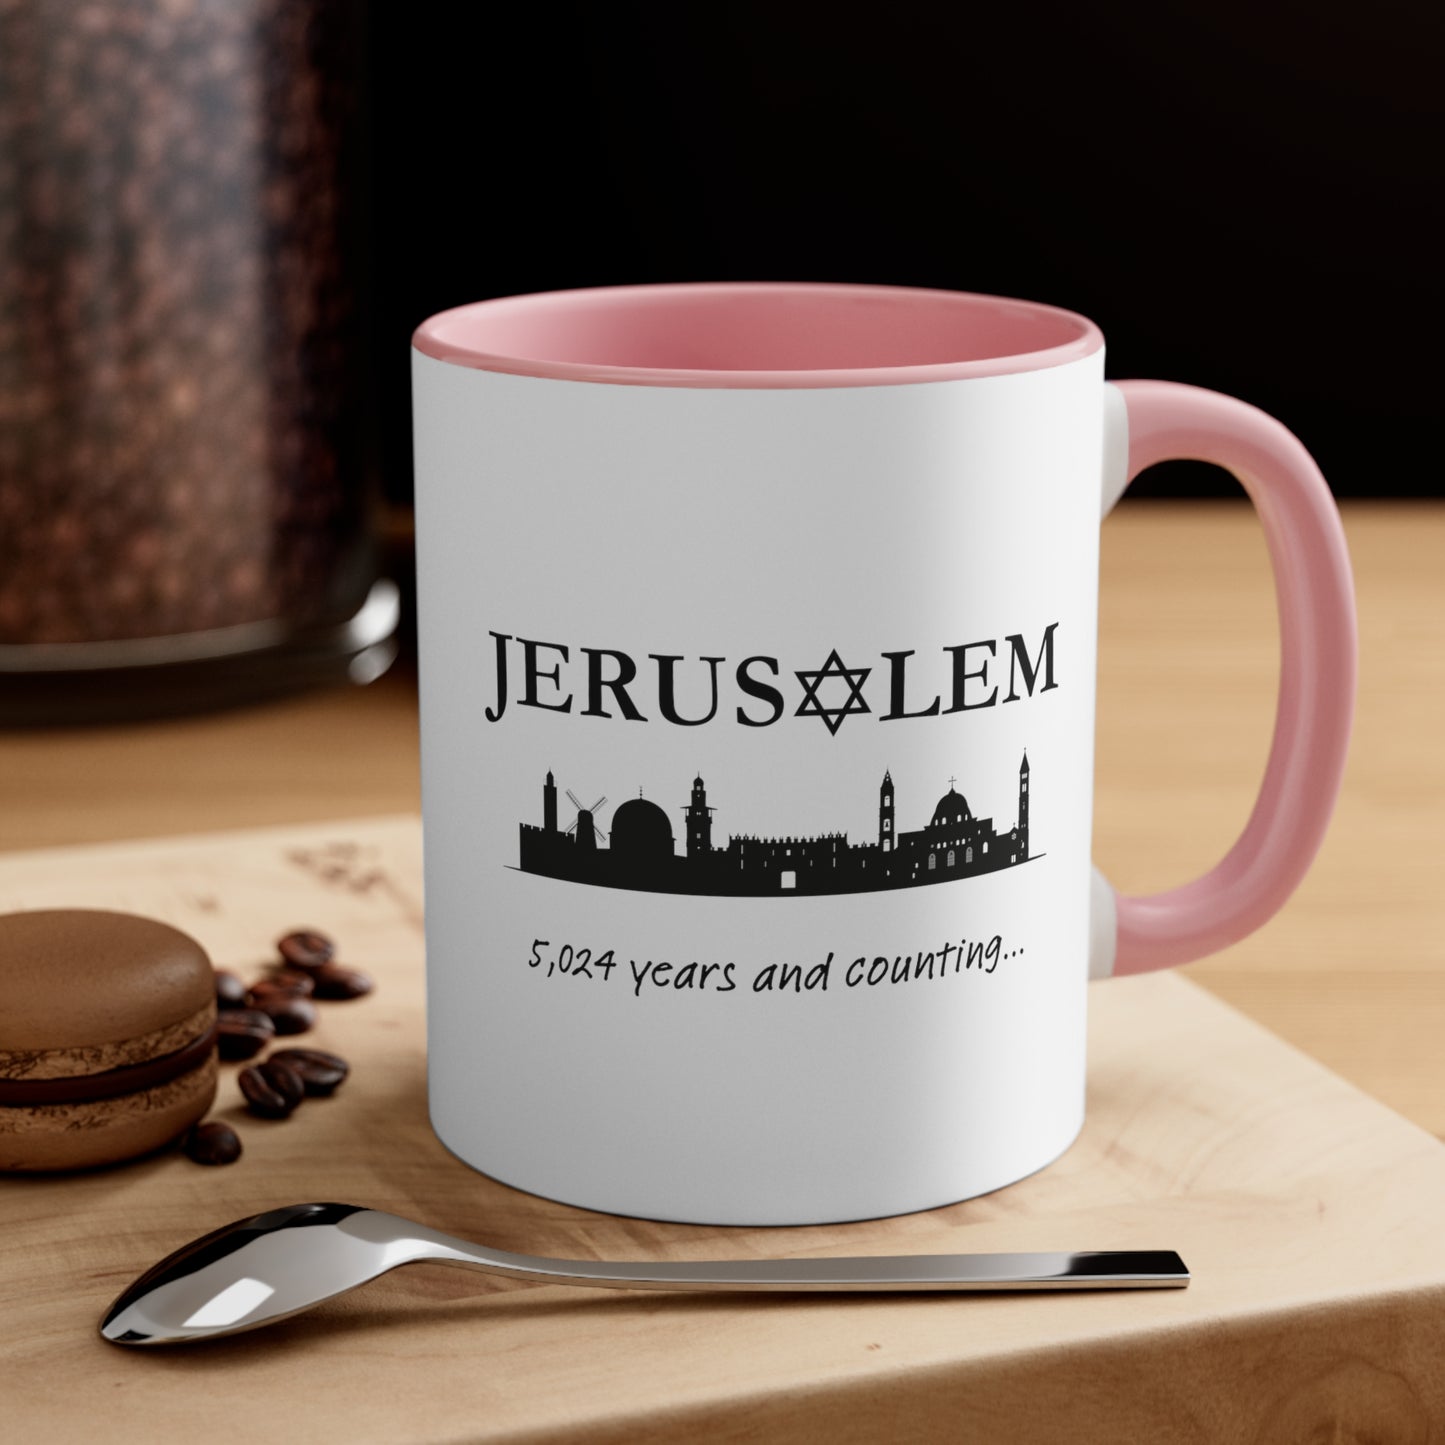 Jerusalem - 5,024 Years and Counting... Accent Coffee Mug, 11oz